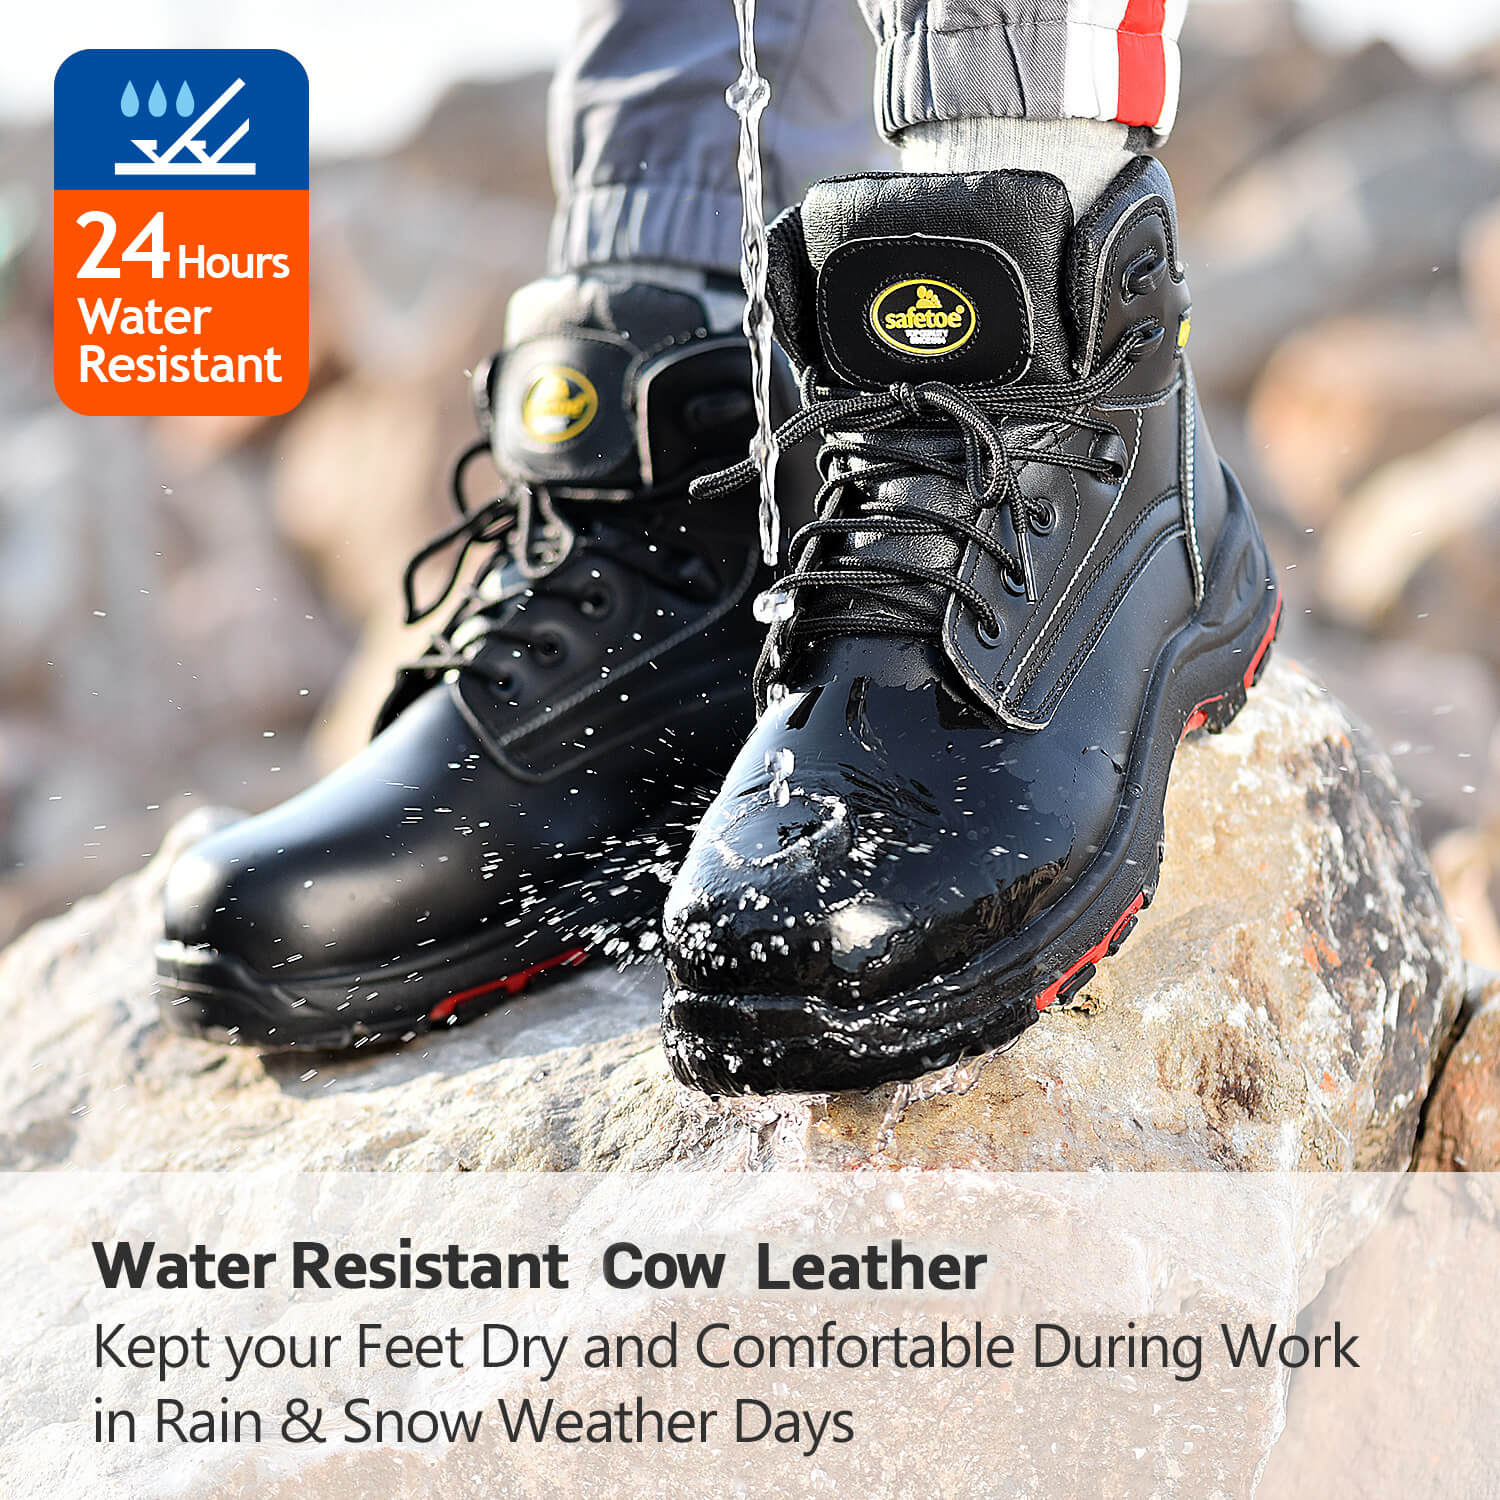 Safetoe Water Resistant Wide Fit Safety Work Boots